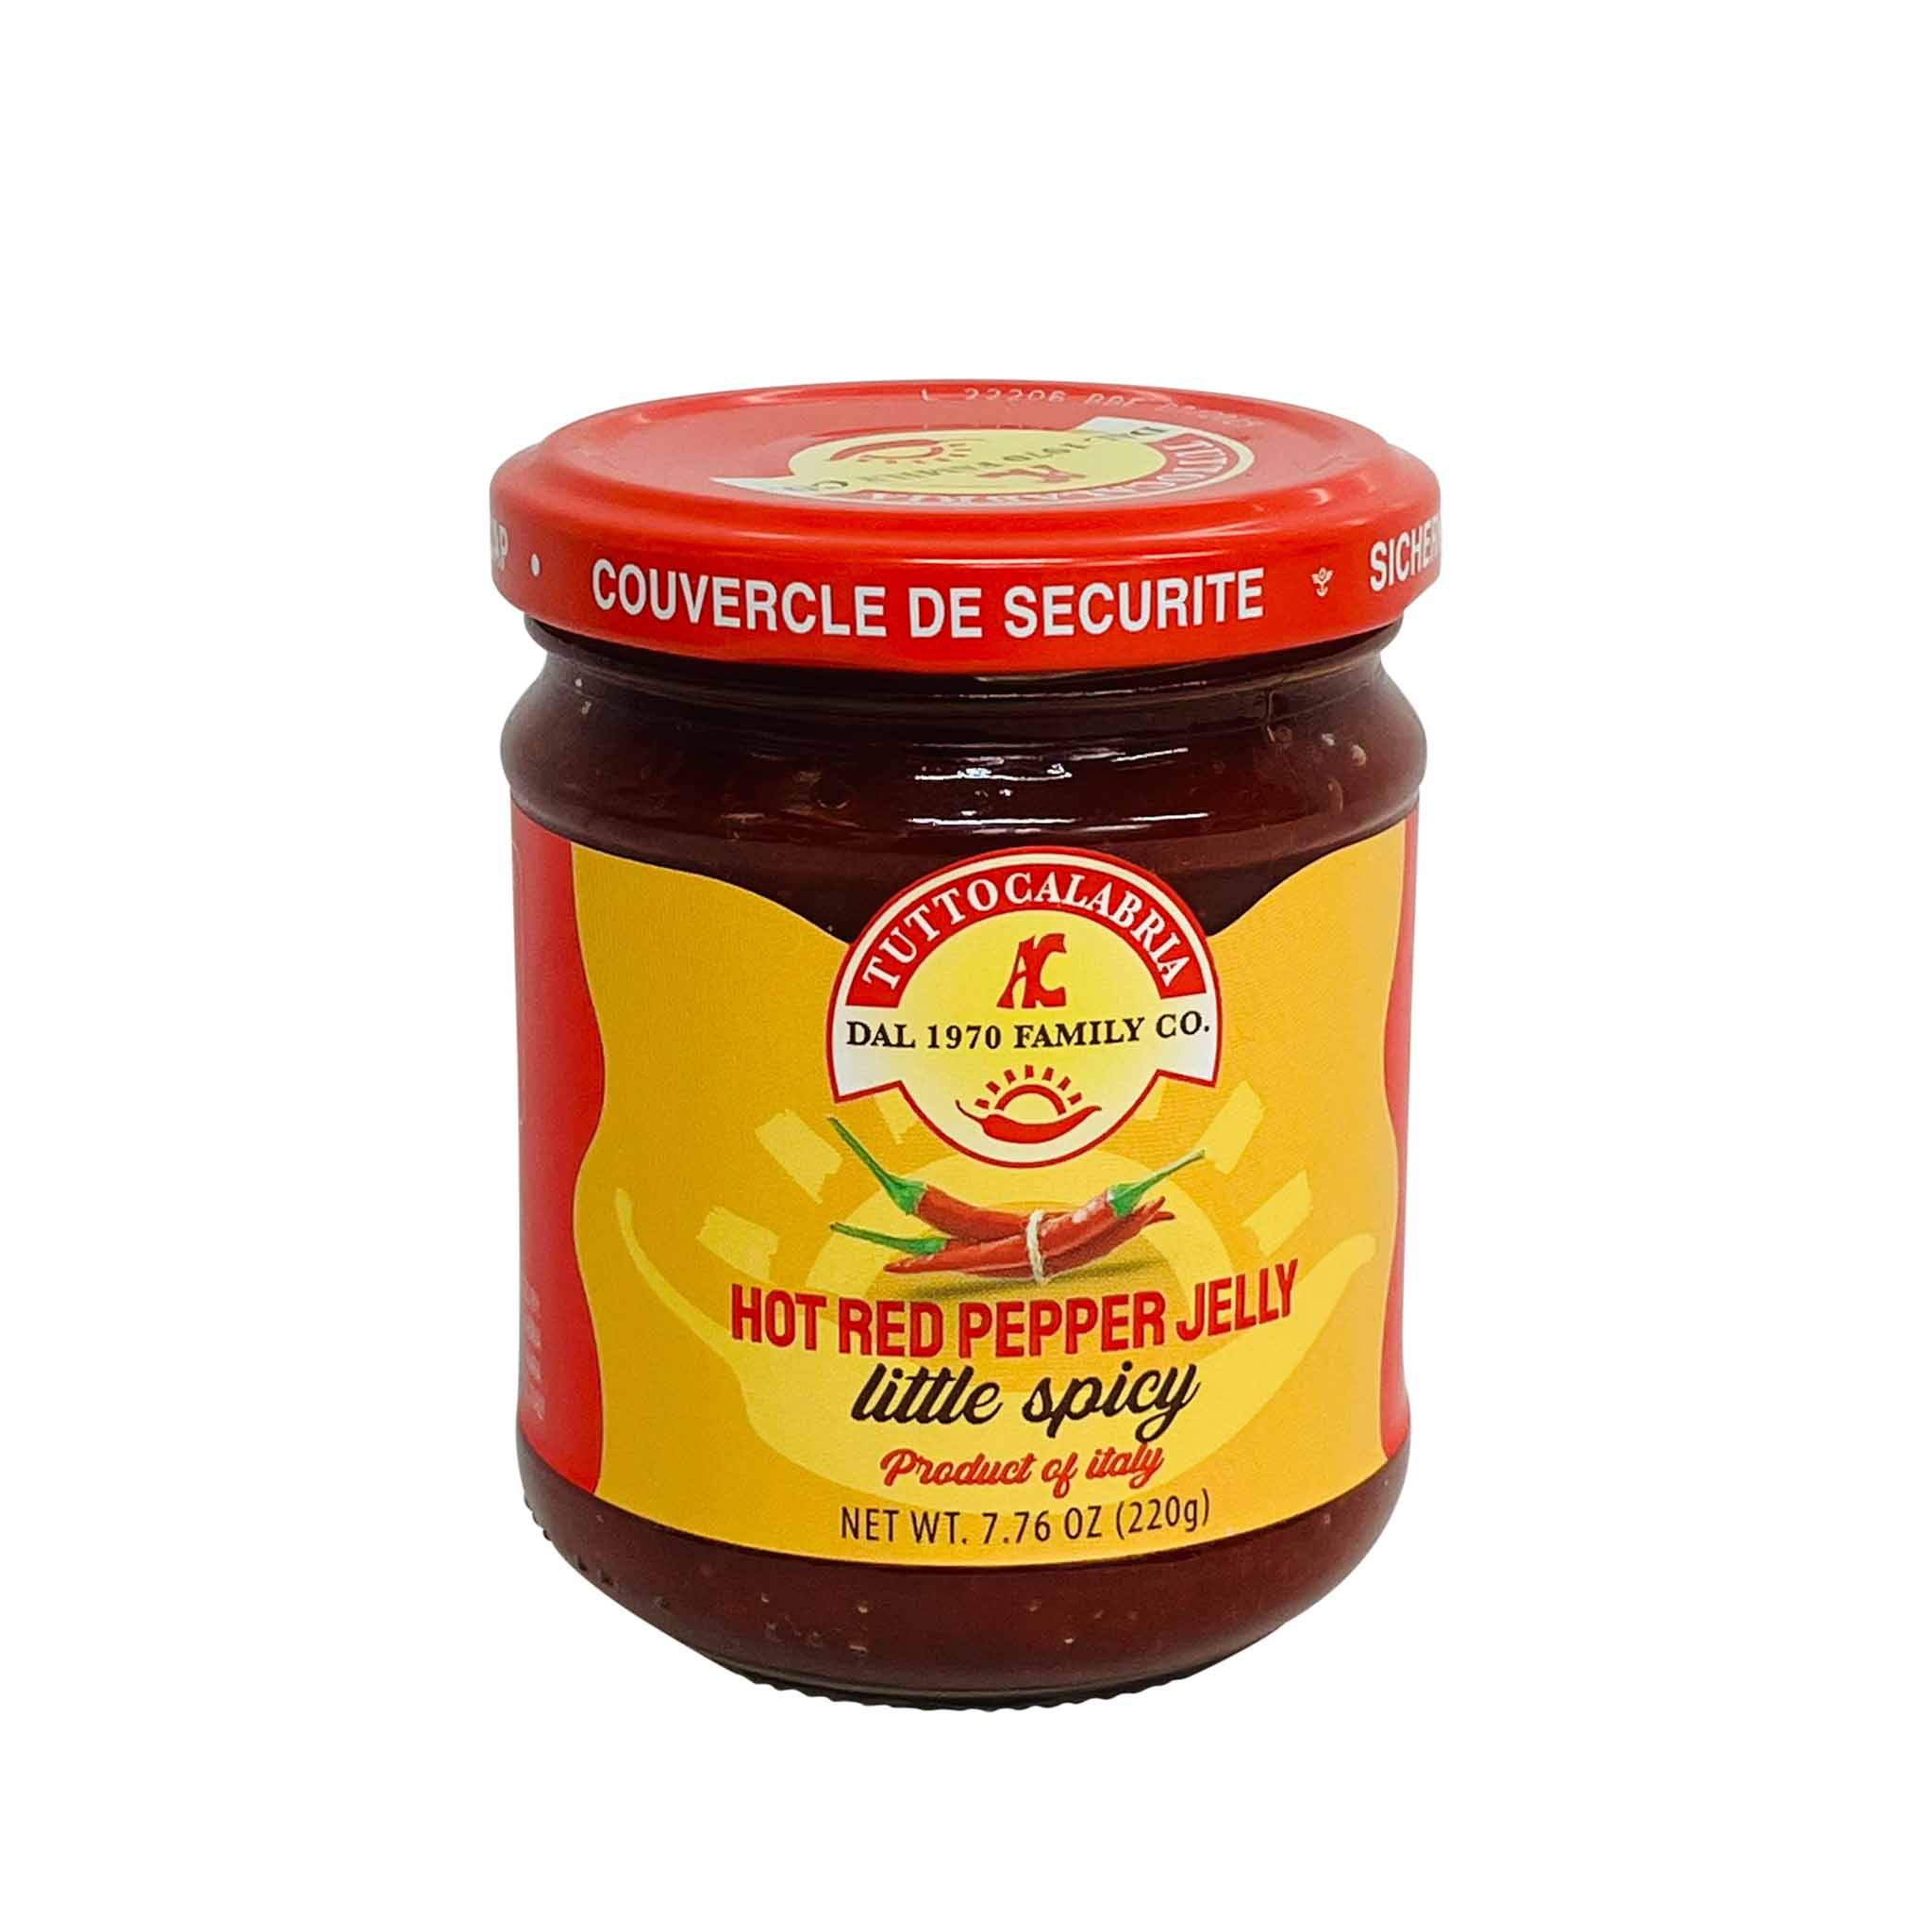 TUTTO CALABRIA HOT RED PEPPER JELLY 220g